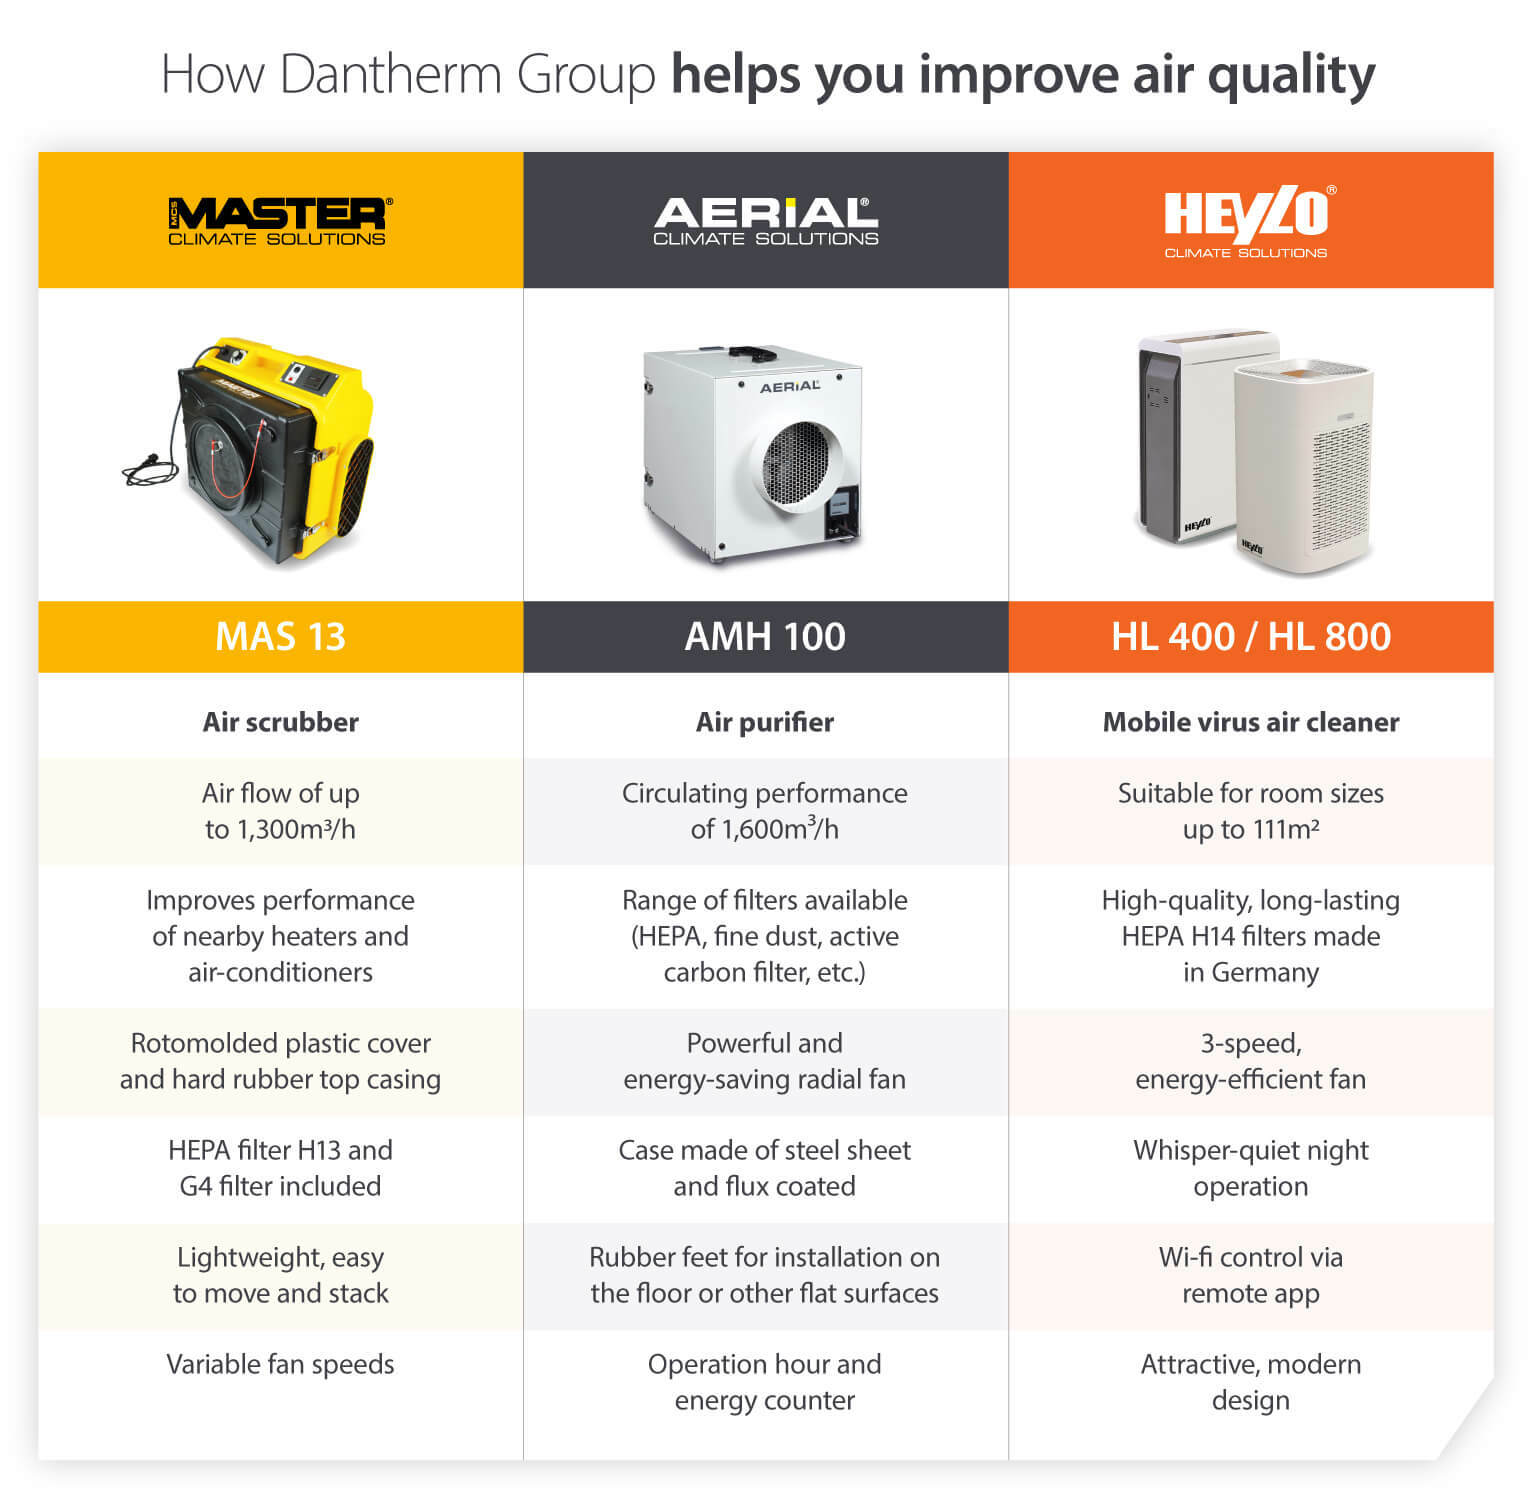 Air purifiers or air scrubbers supplied by Dantherm Group to improve air quality in building and commercial spaces - infographic and product comparison